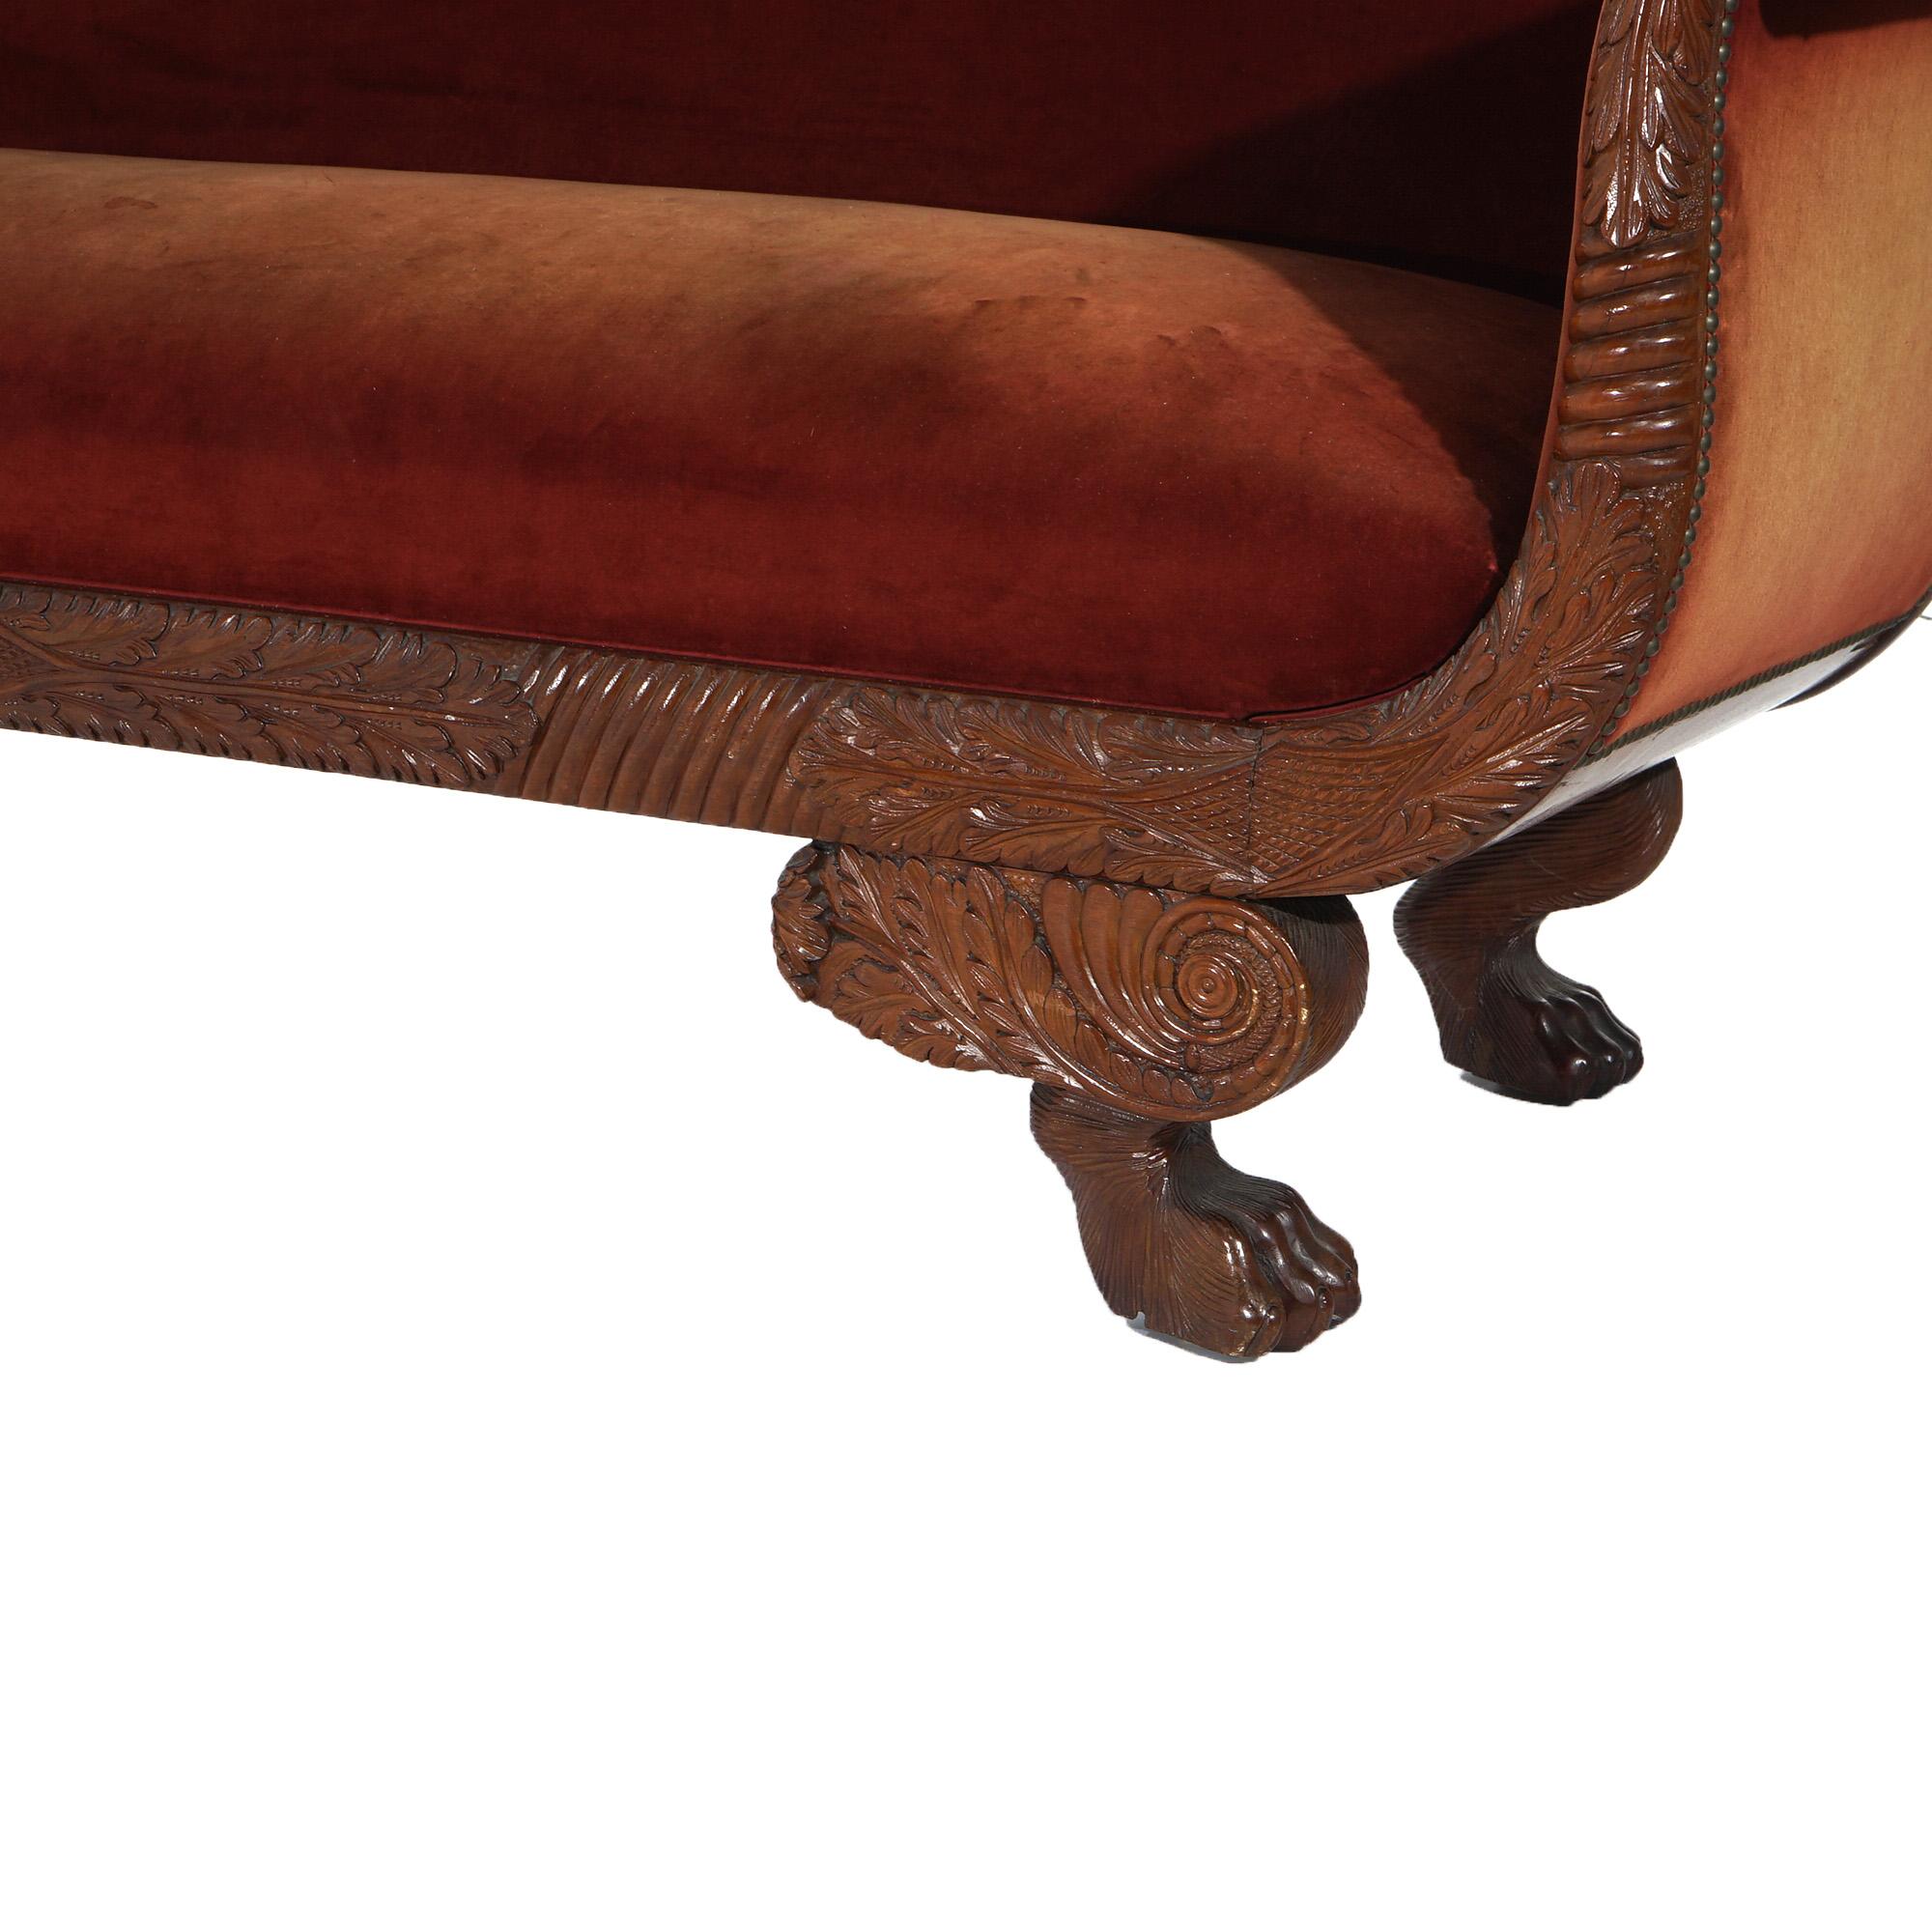 Antique Neoclassical American Empire Carved Walnut And Burl Sofa C1840 For Sale 1